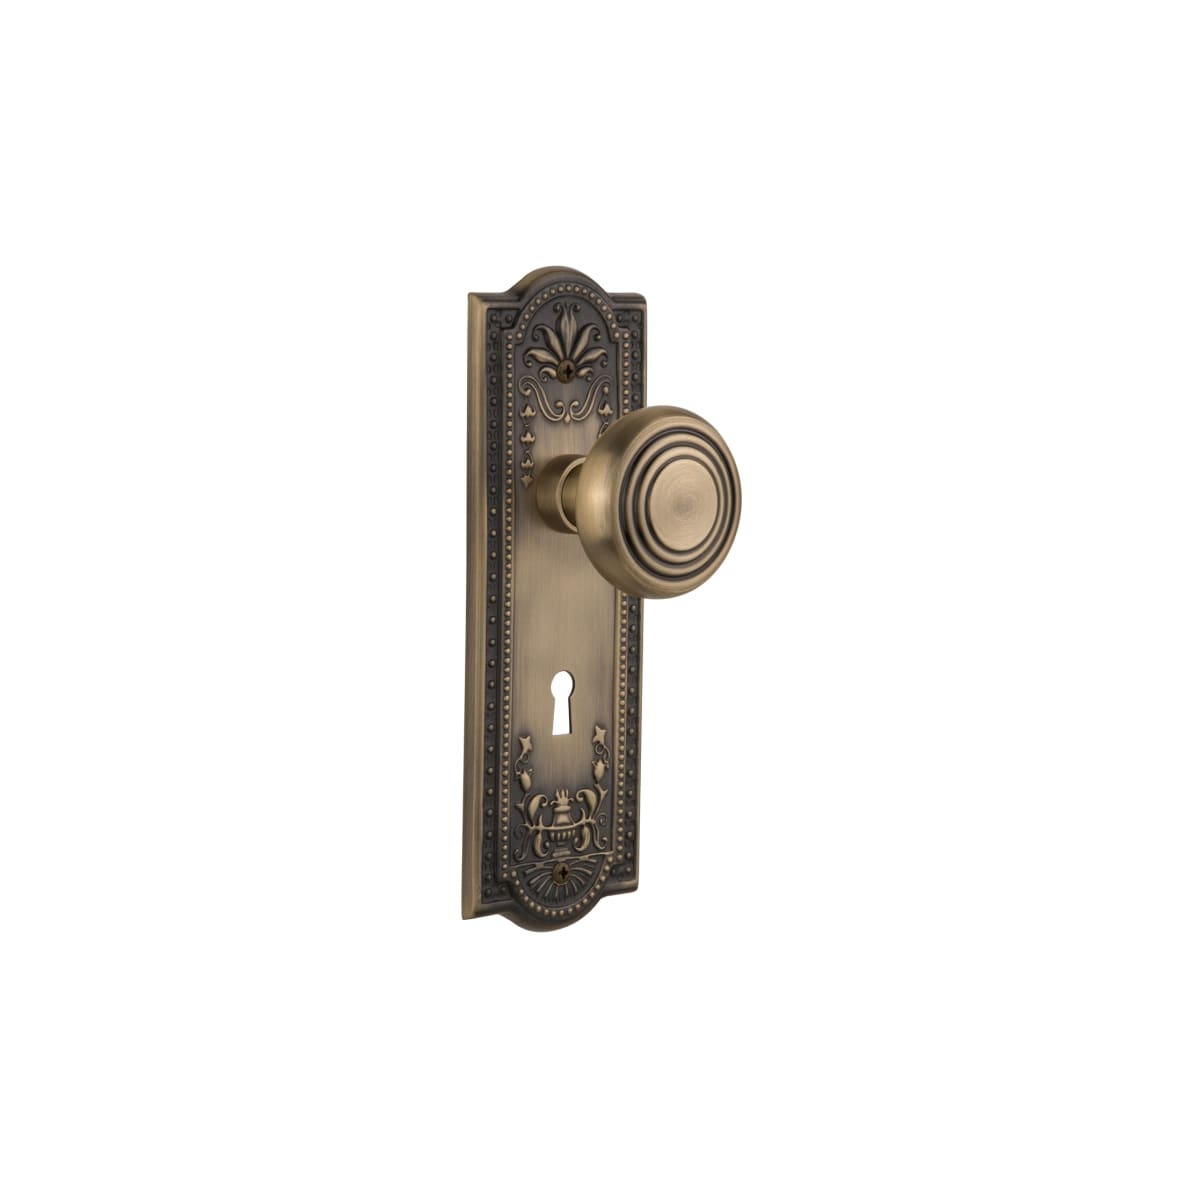 Oil-Rubbed Bronze Privacy Privacy 2.375 716540 Nostalgic Warehouse New York Plate with Craftsman Knob 2.375